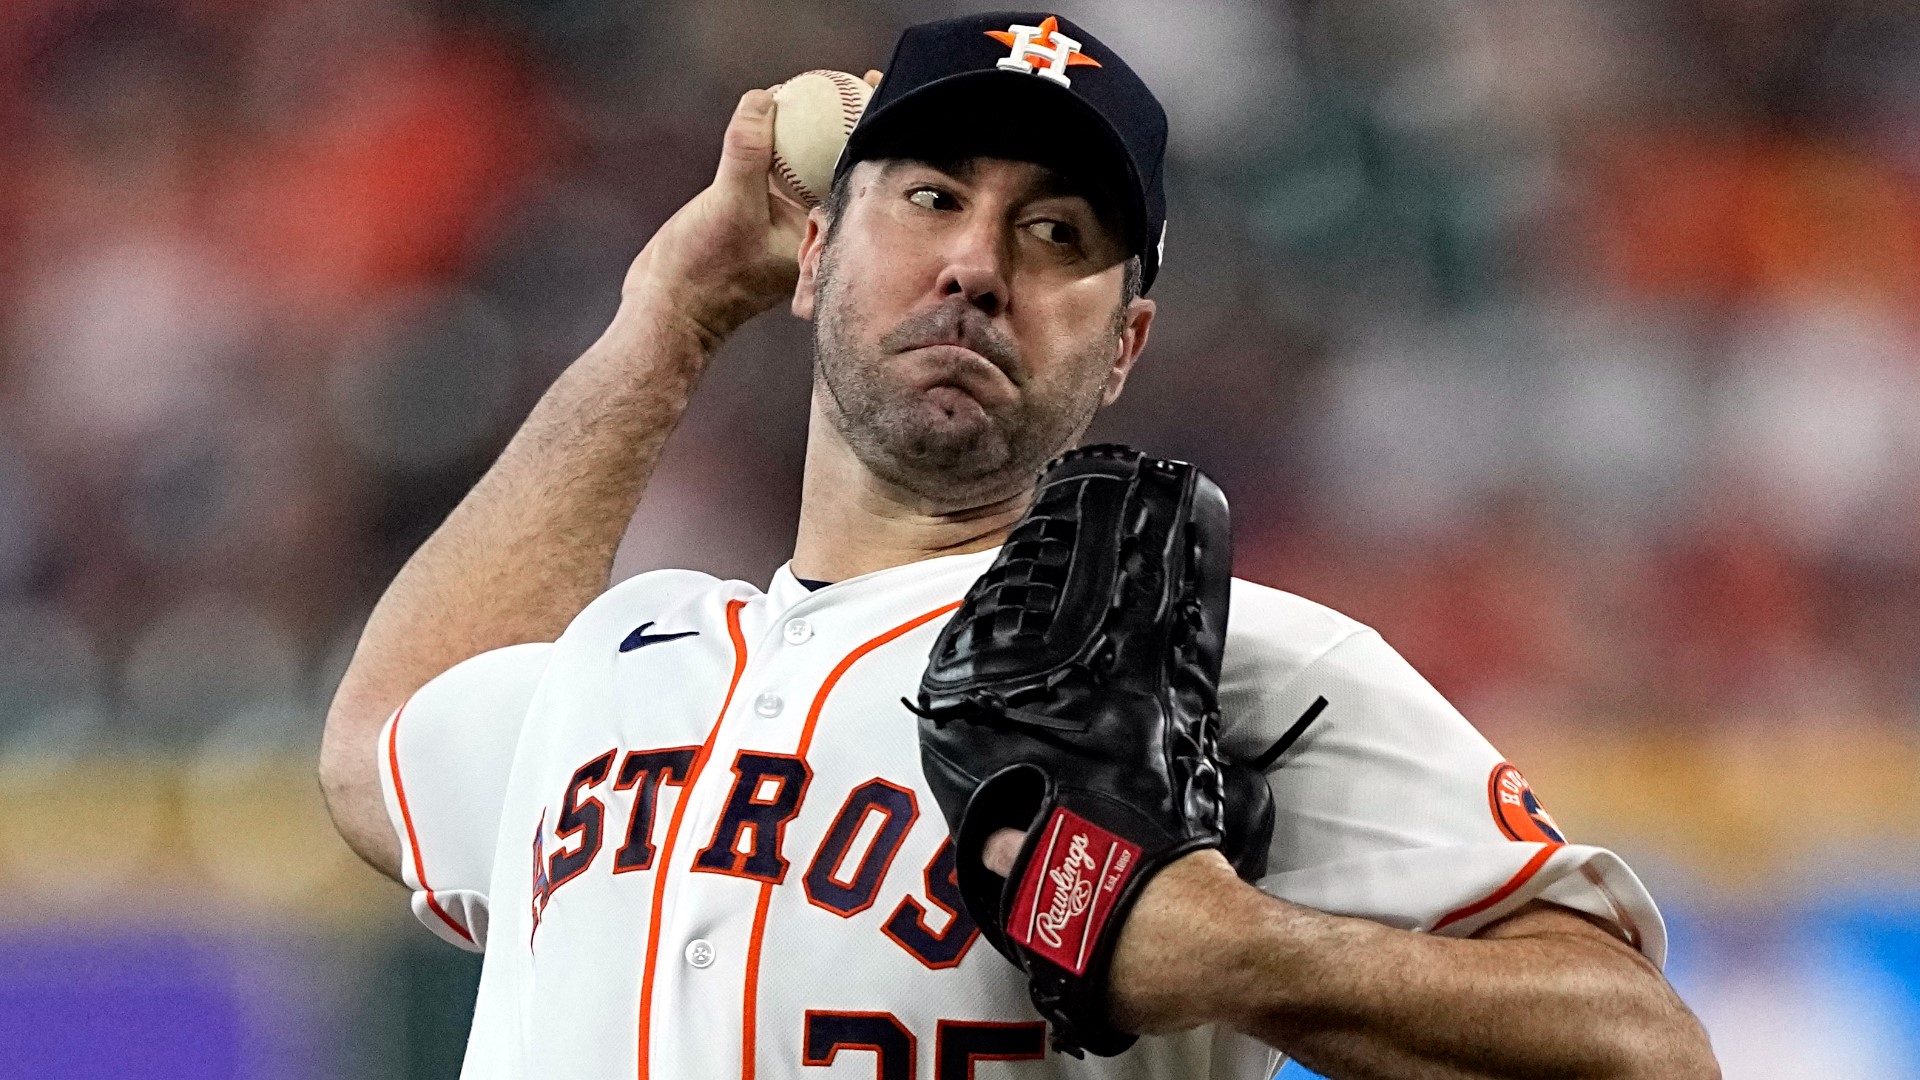 The Mets are trading Justin Verlander to the Astros